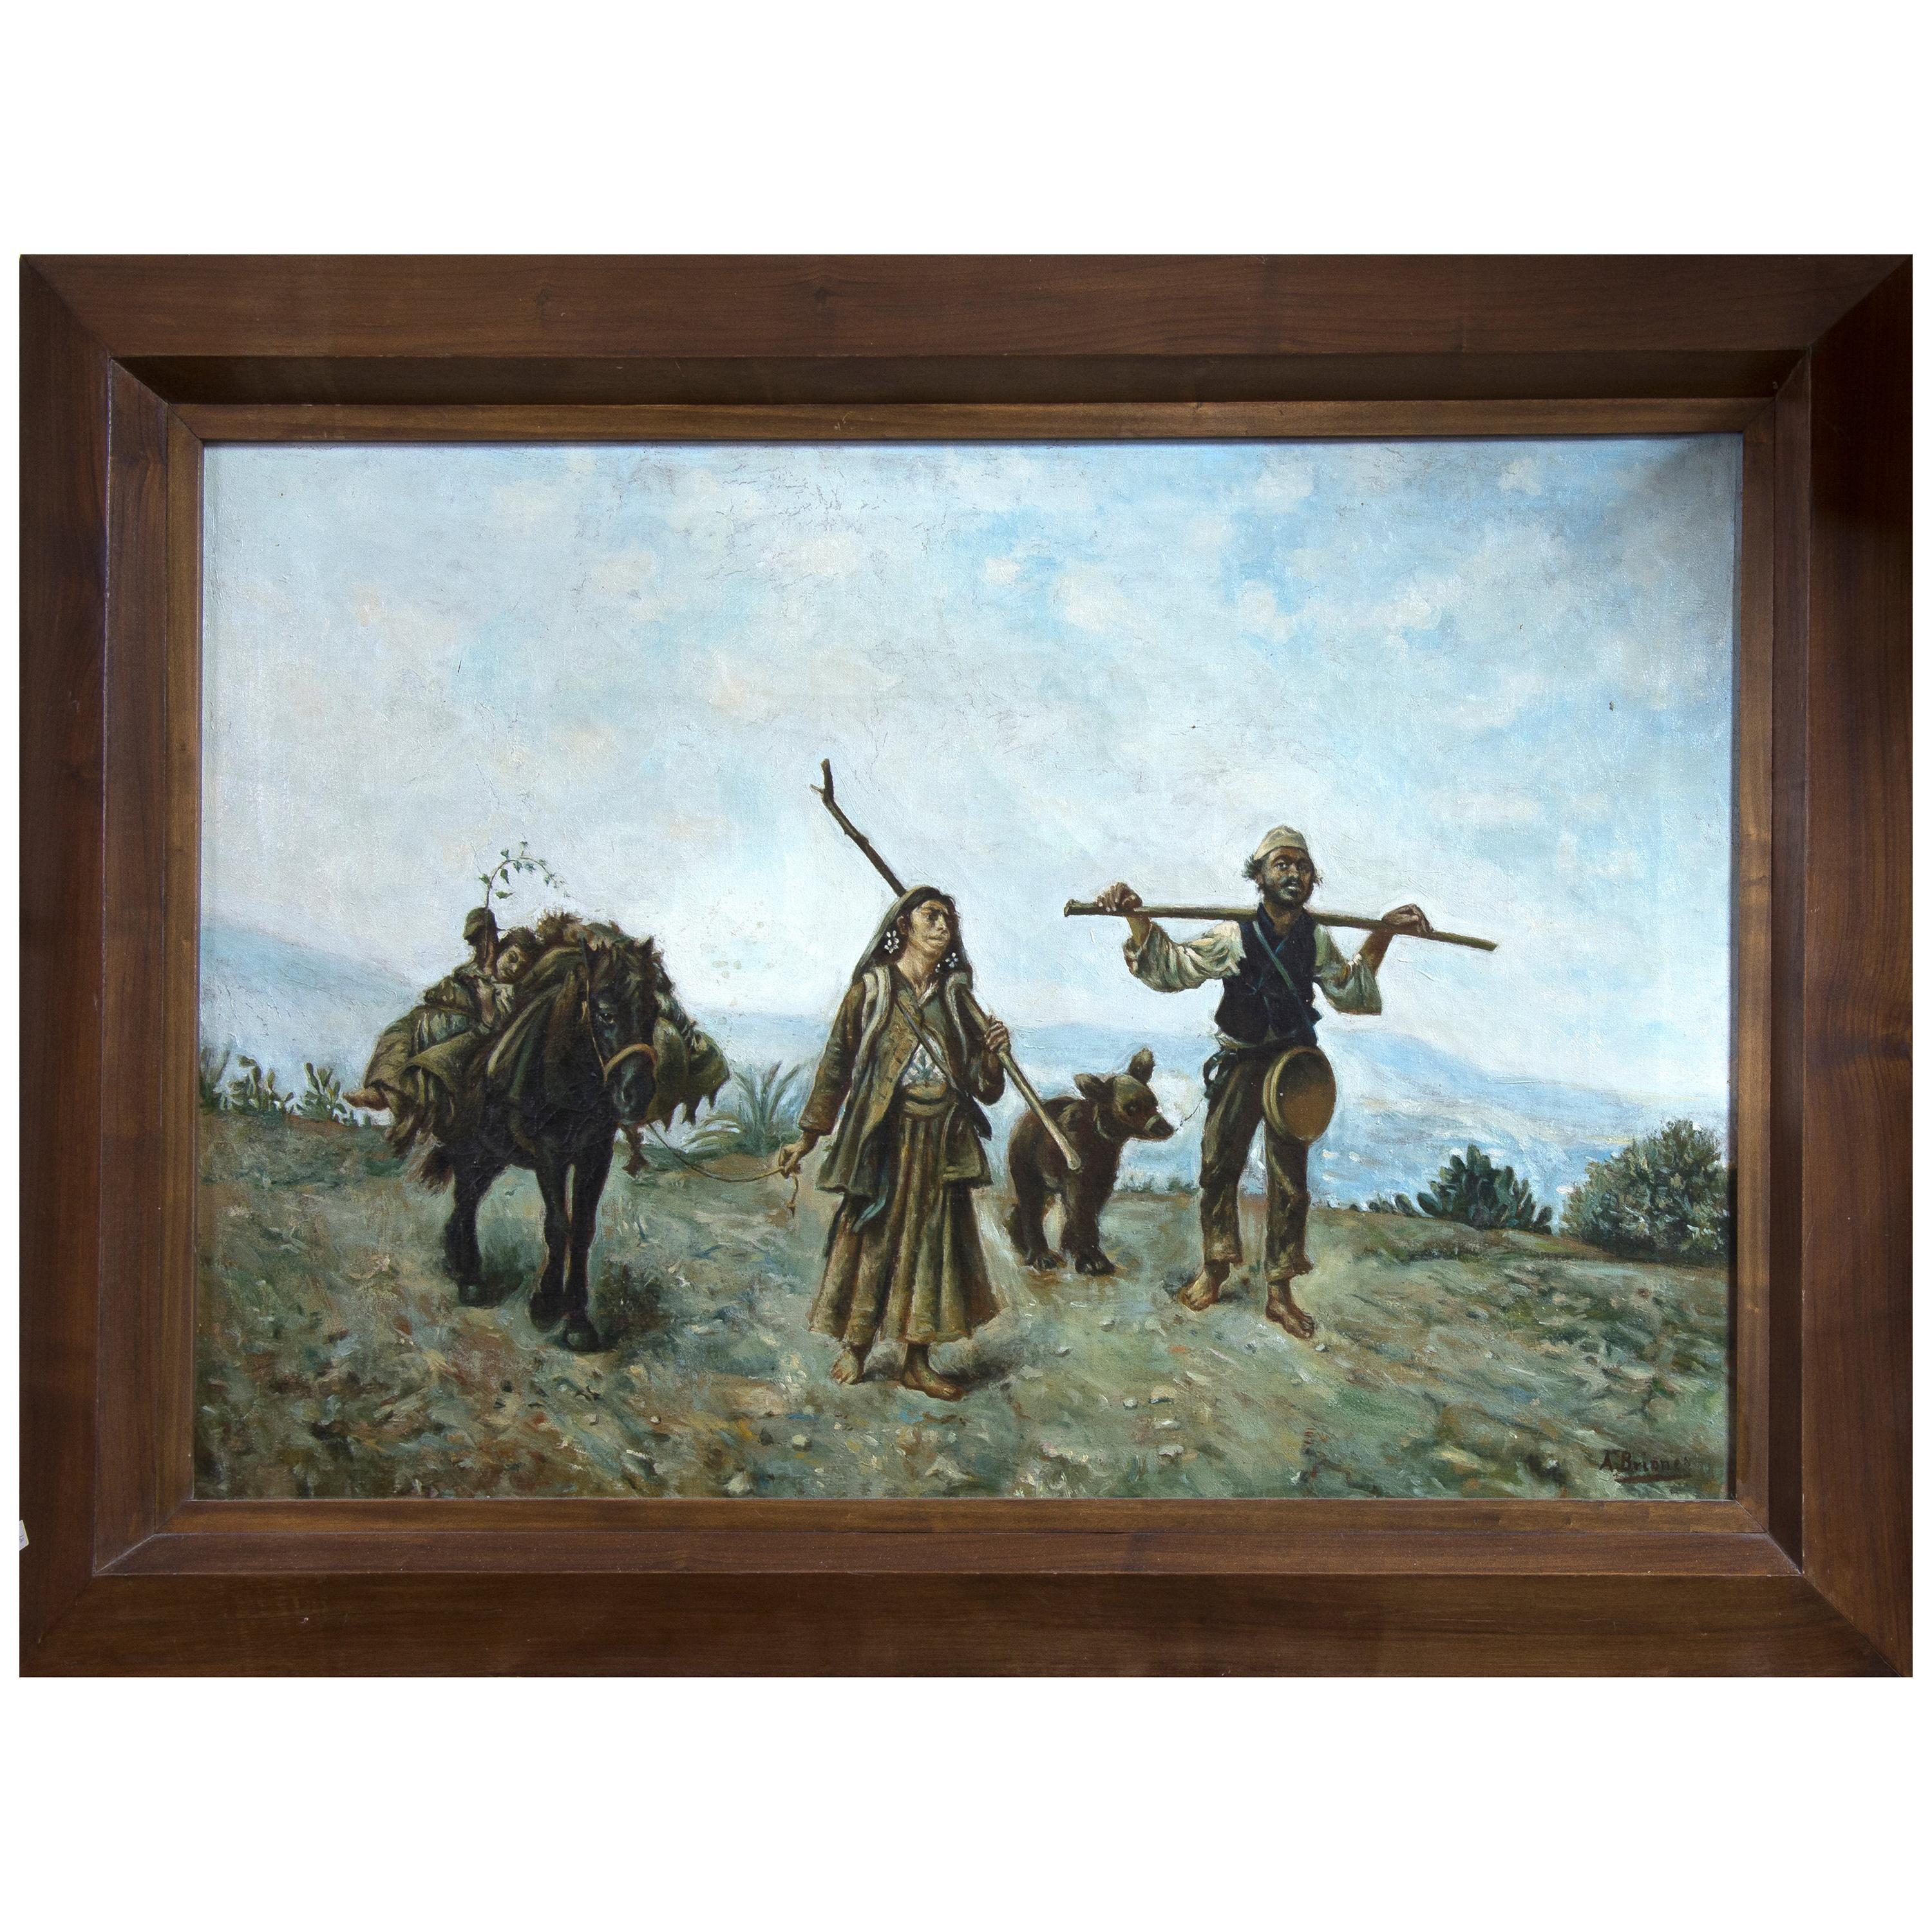 "Travellers" Oil on Canvas, Signed "a. Briones", 20th Century